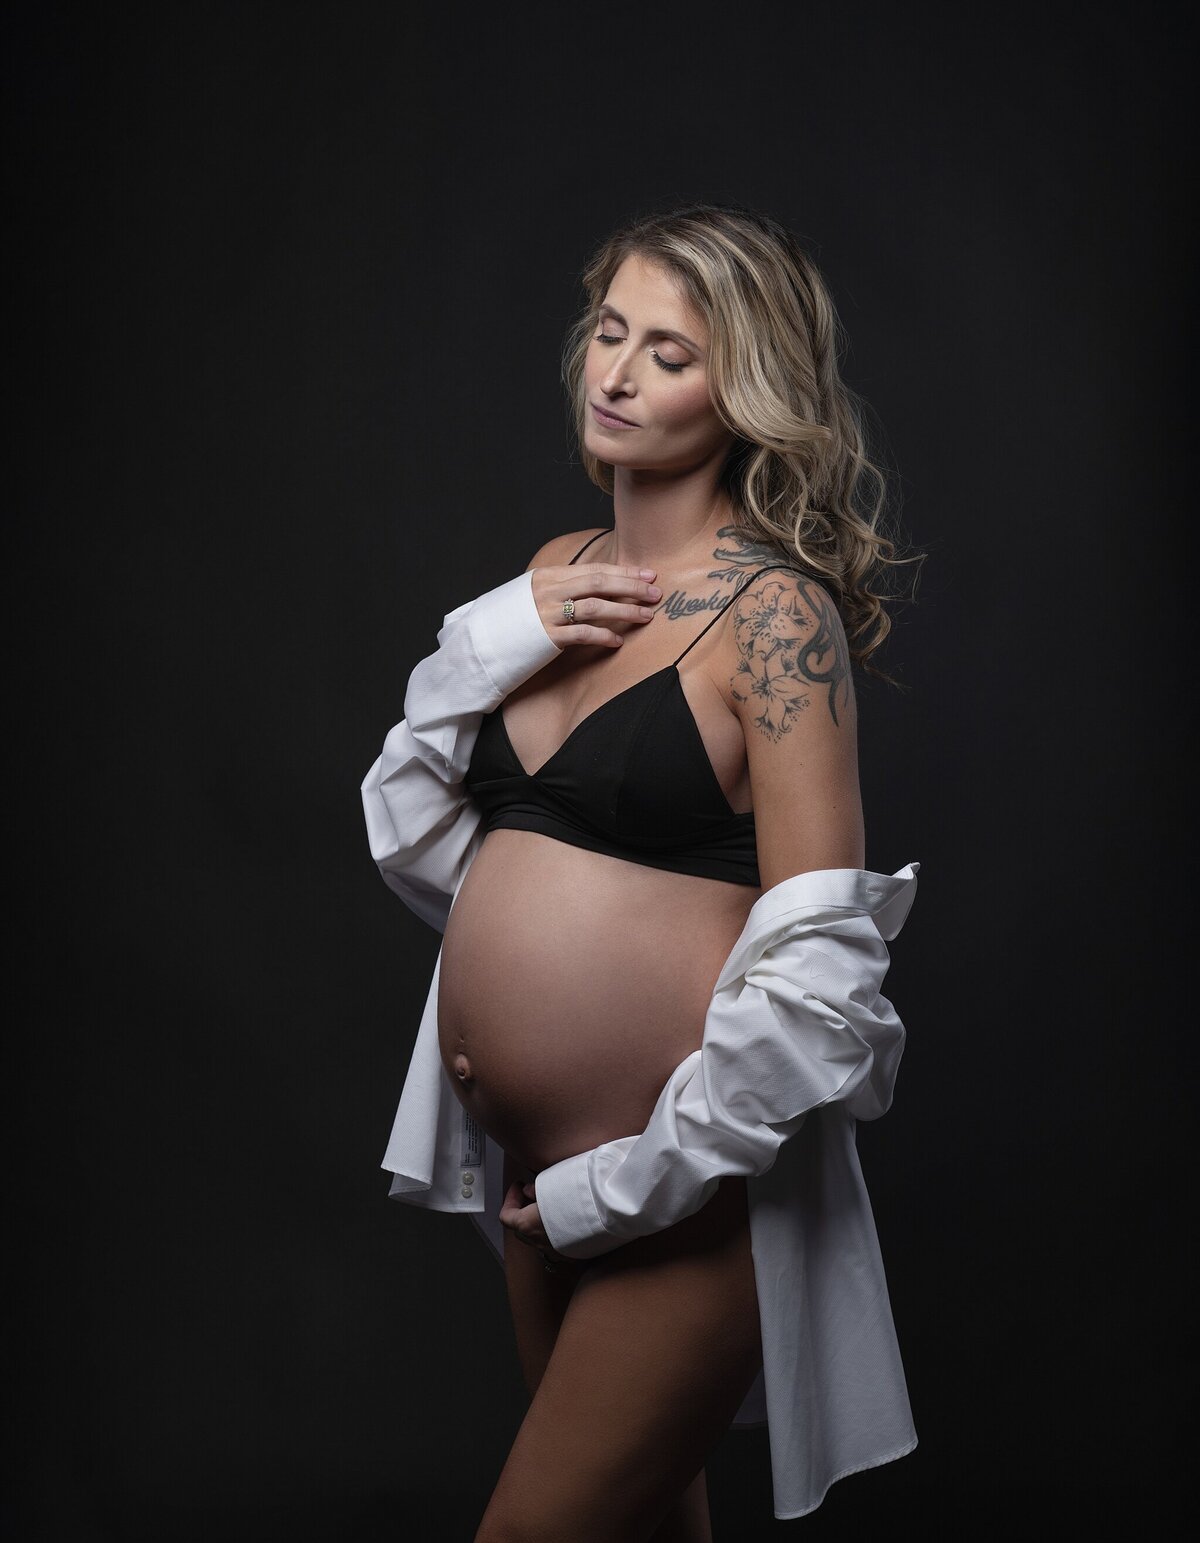 anchorage_maternity_photography_0140